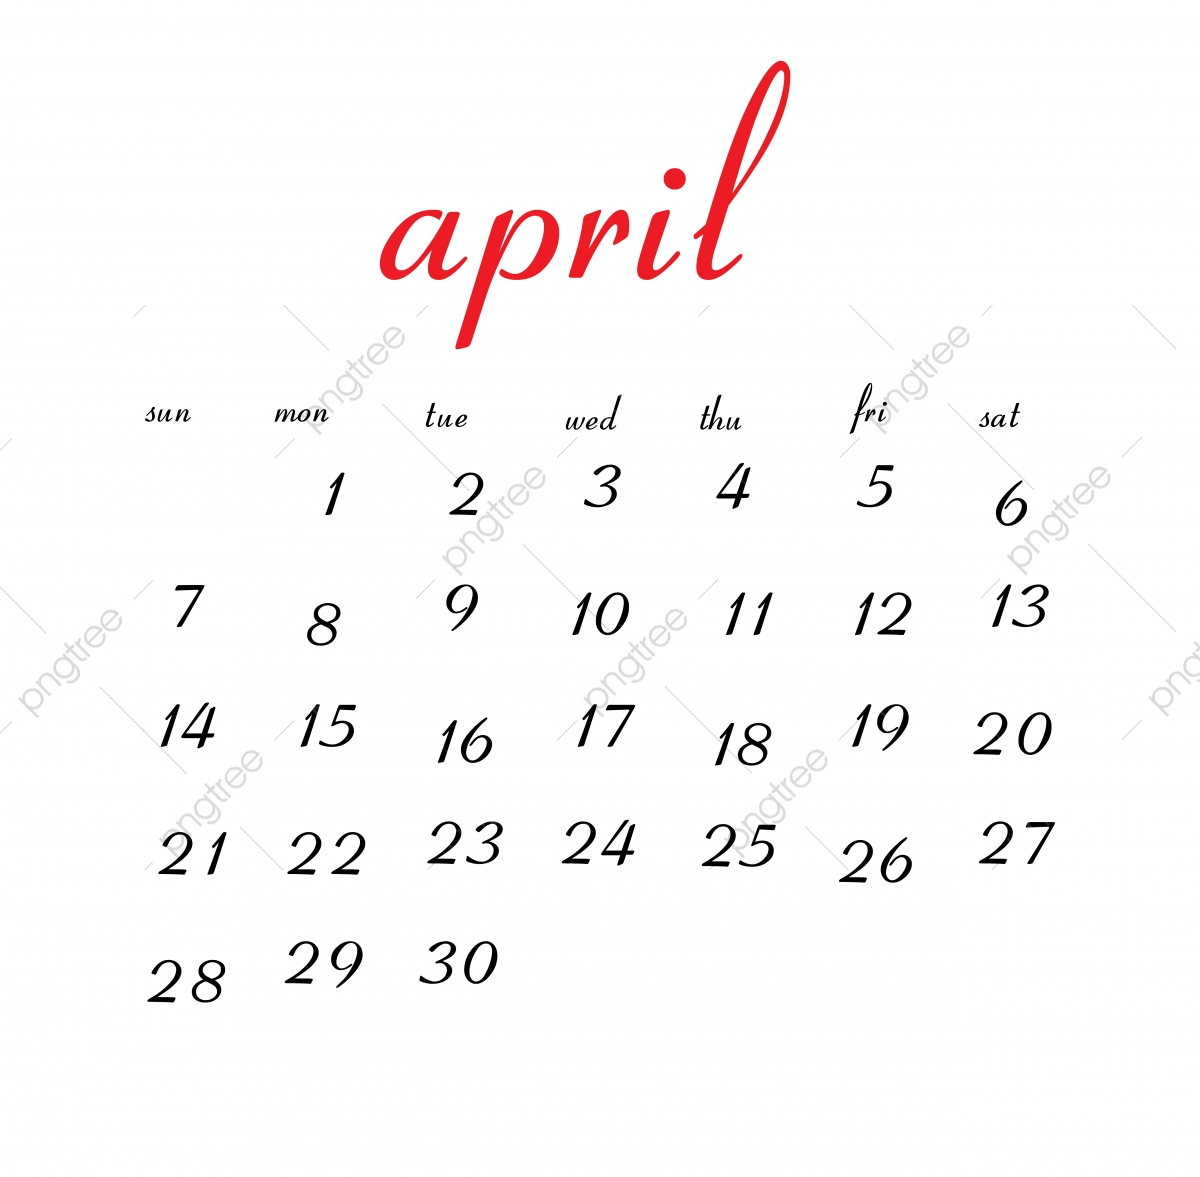 April 2019 Calendar Calendar Clean White PNG And Vector With